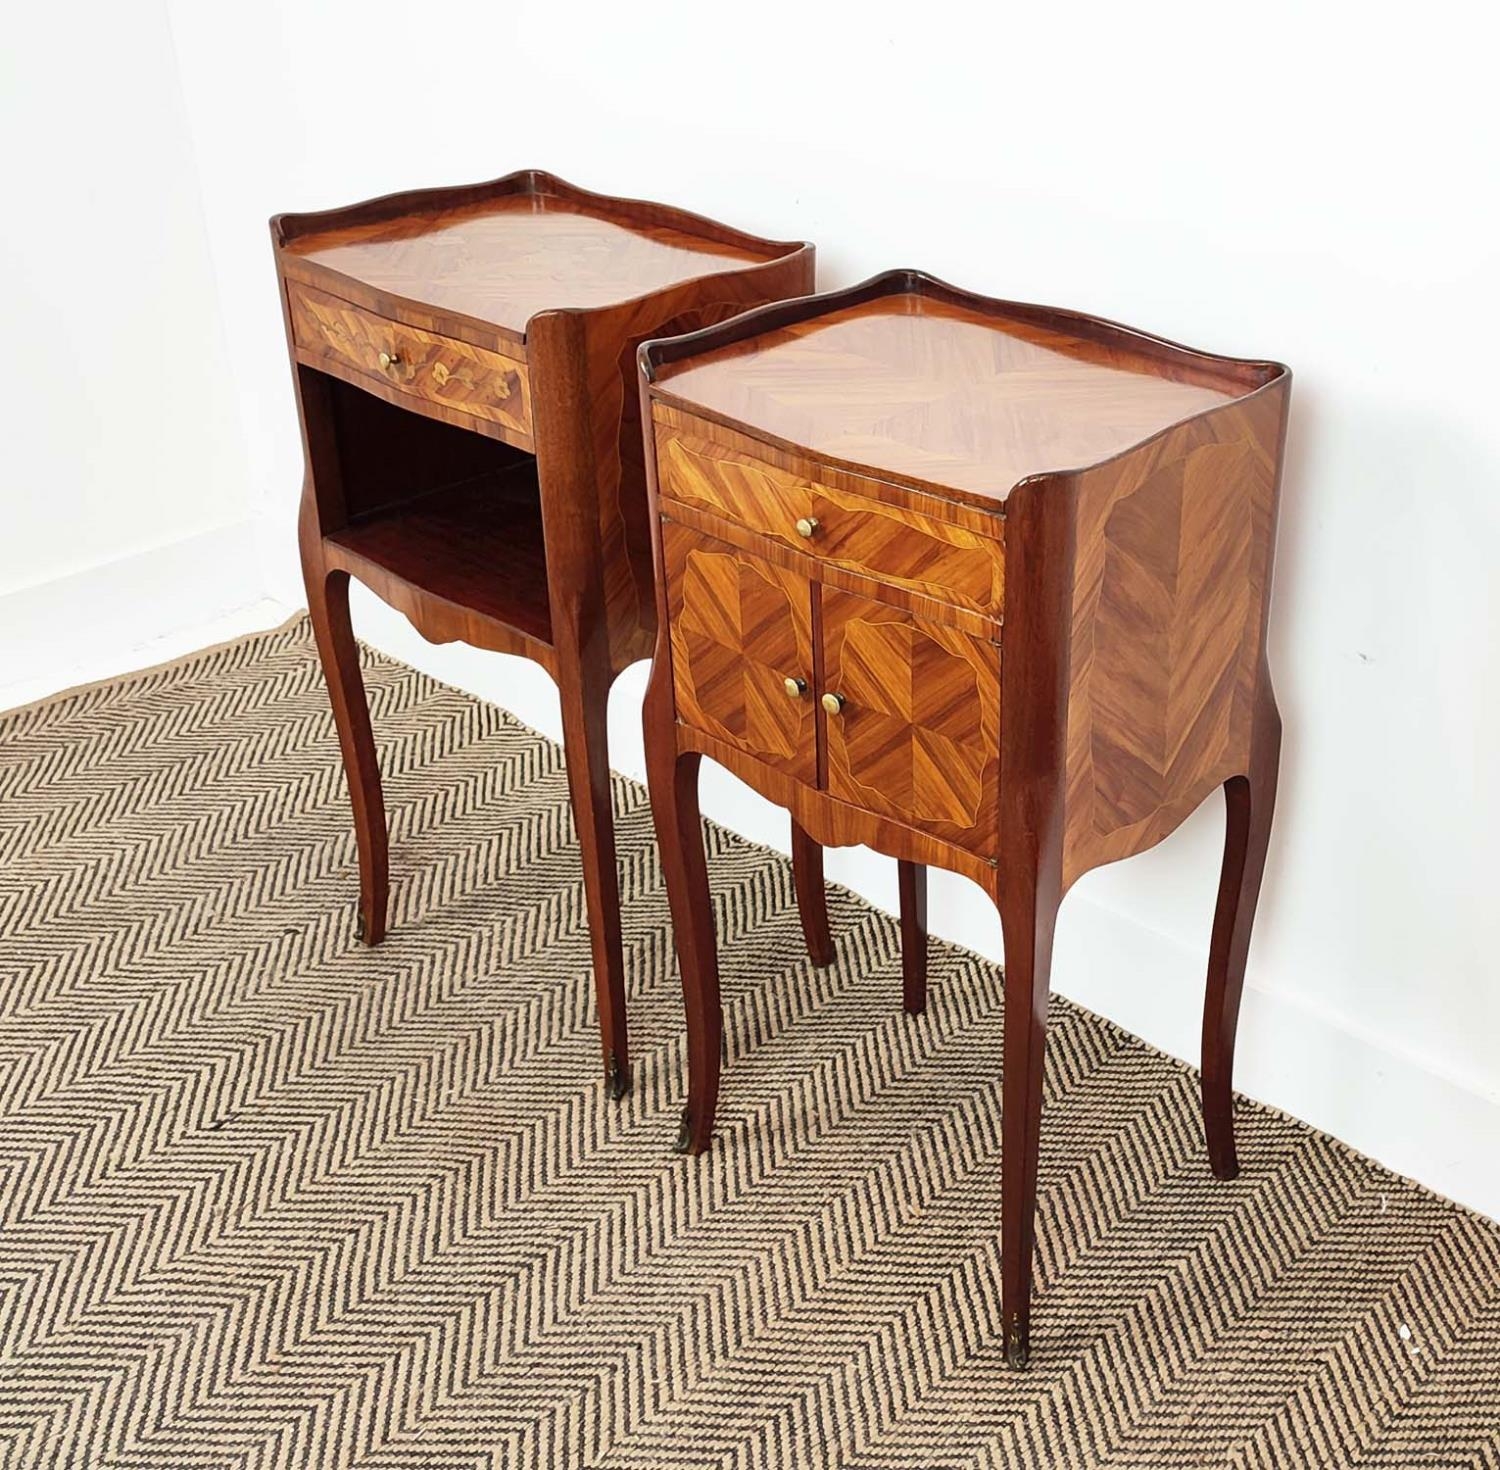 BEDSIDE CABINETS, a matched pair, Louis XV style tulipwood and inlaid, one with marquetry and - Image 3 of 10